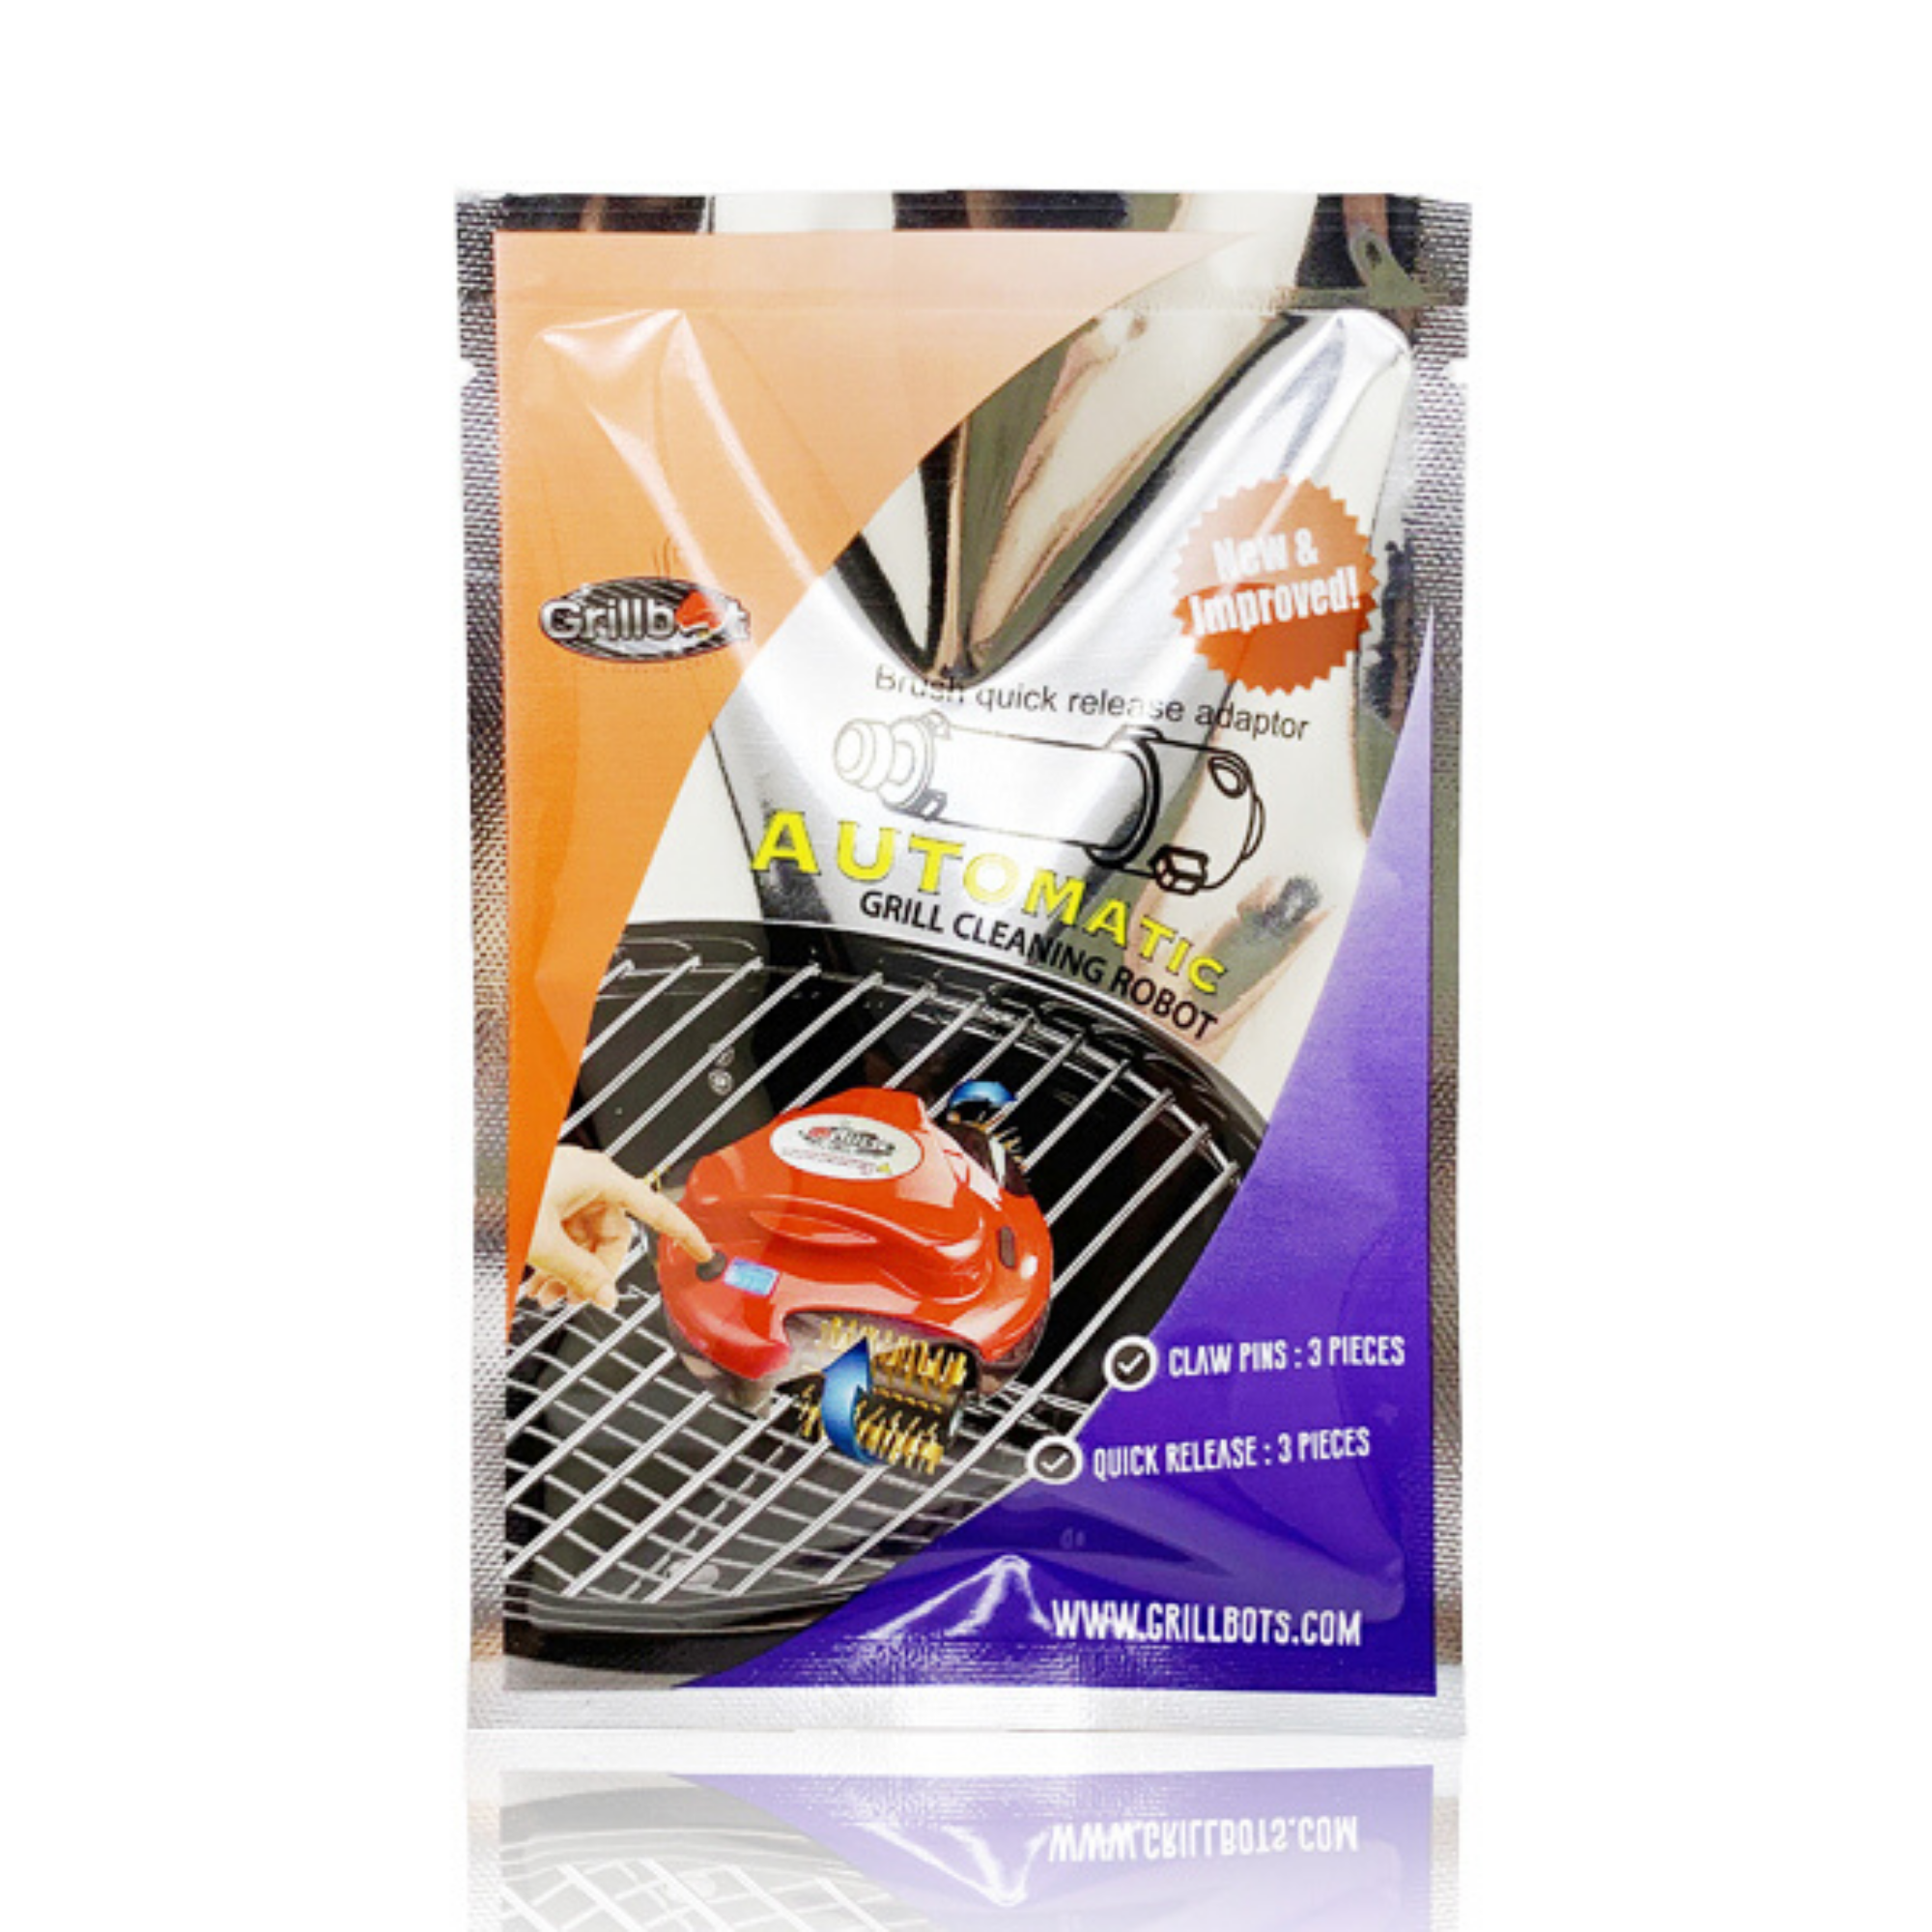 New Quick Release Grill Brush Adapter (3 per pack)!